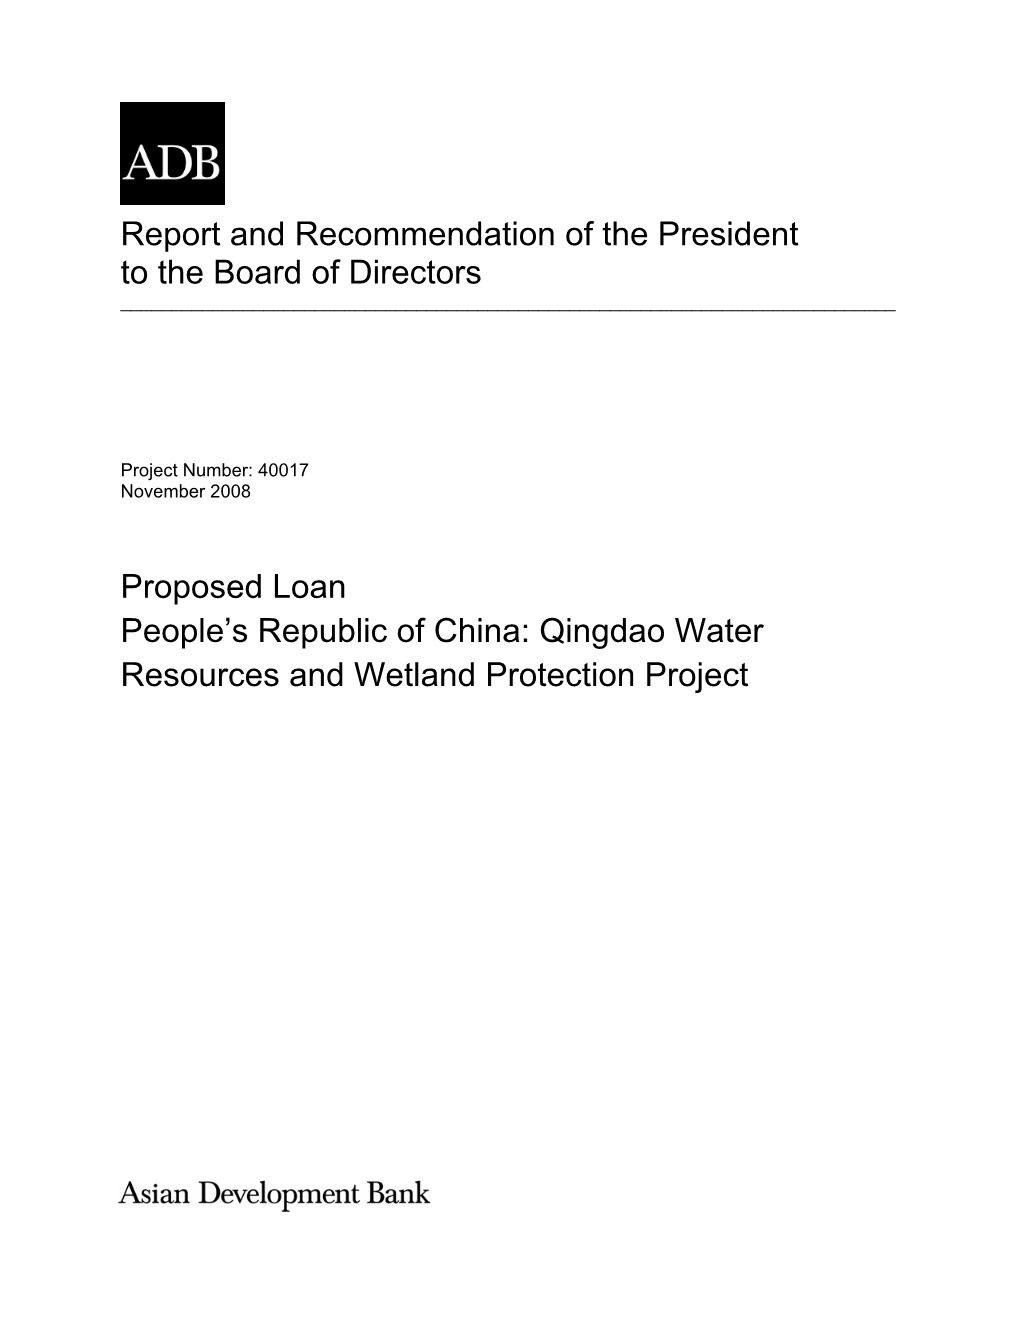 Qingdao Water Resources and Wetland Protection Project